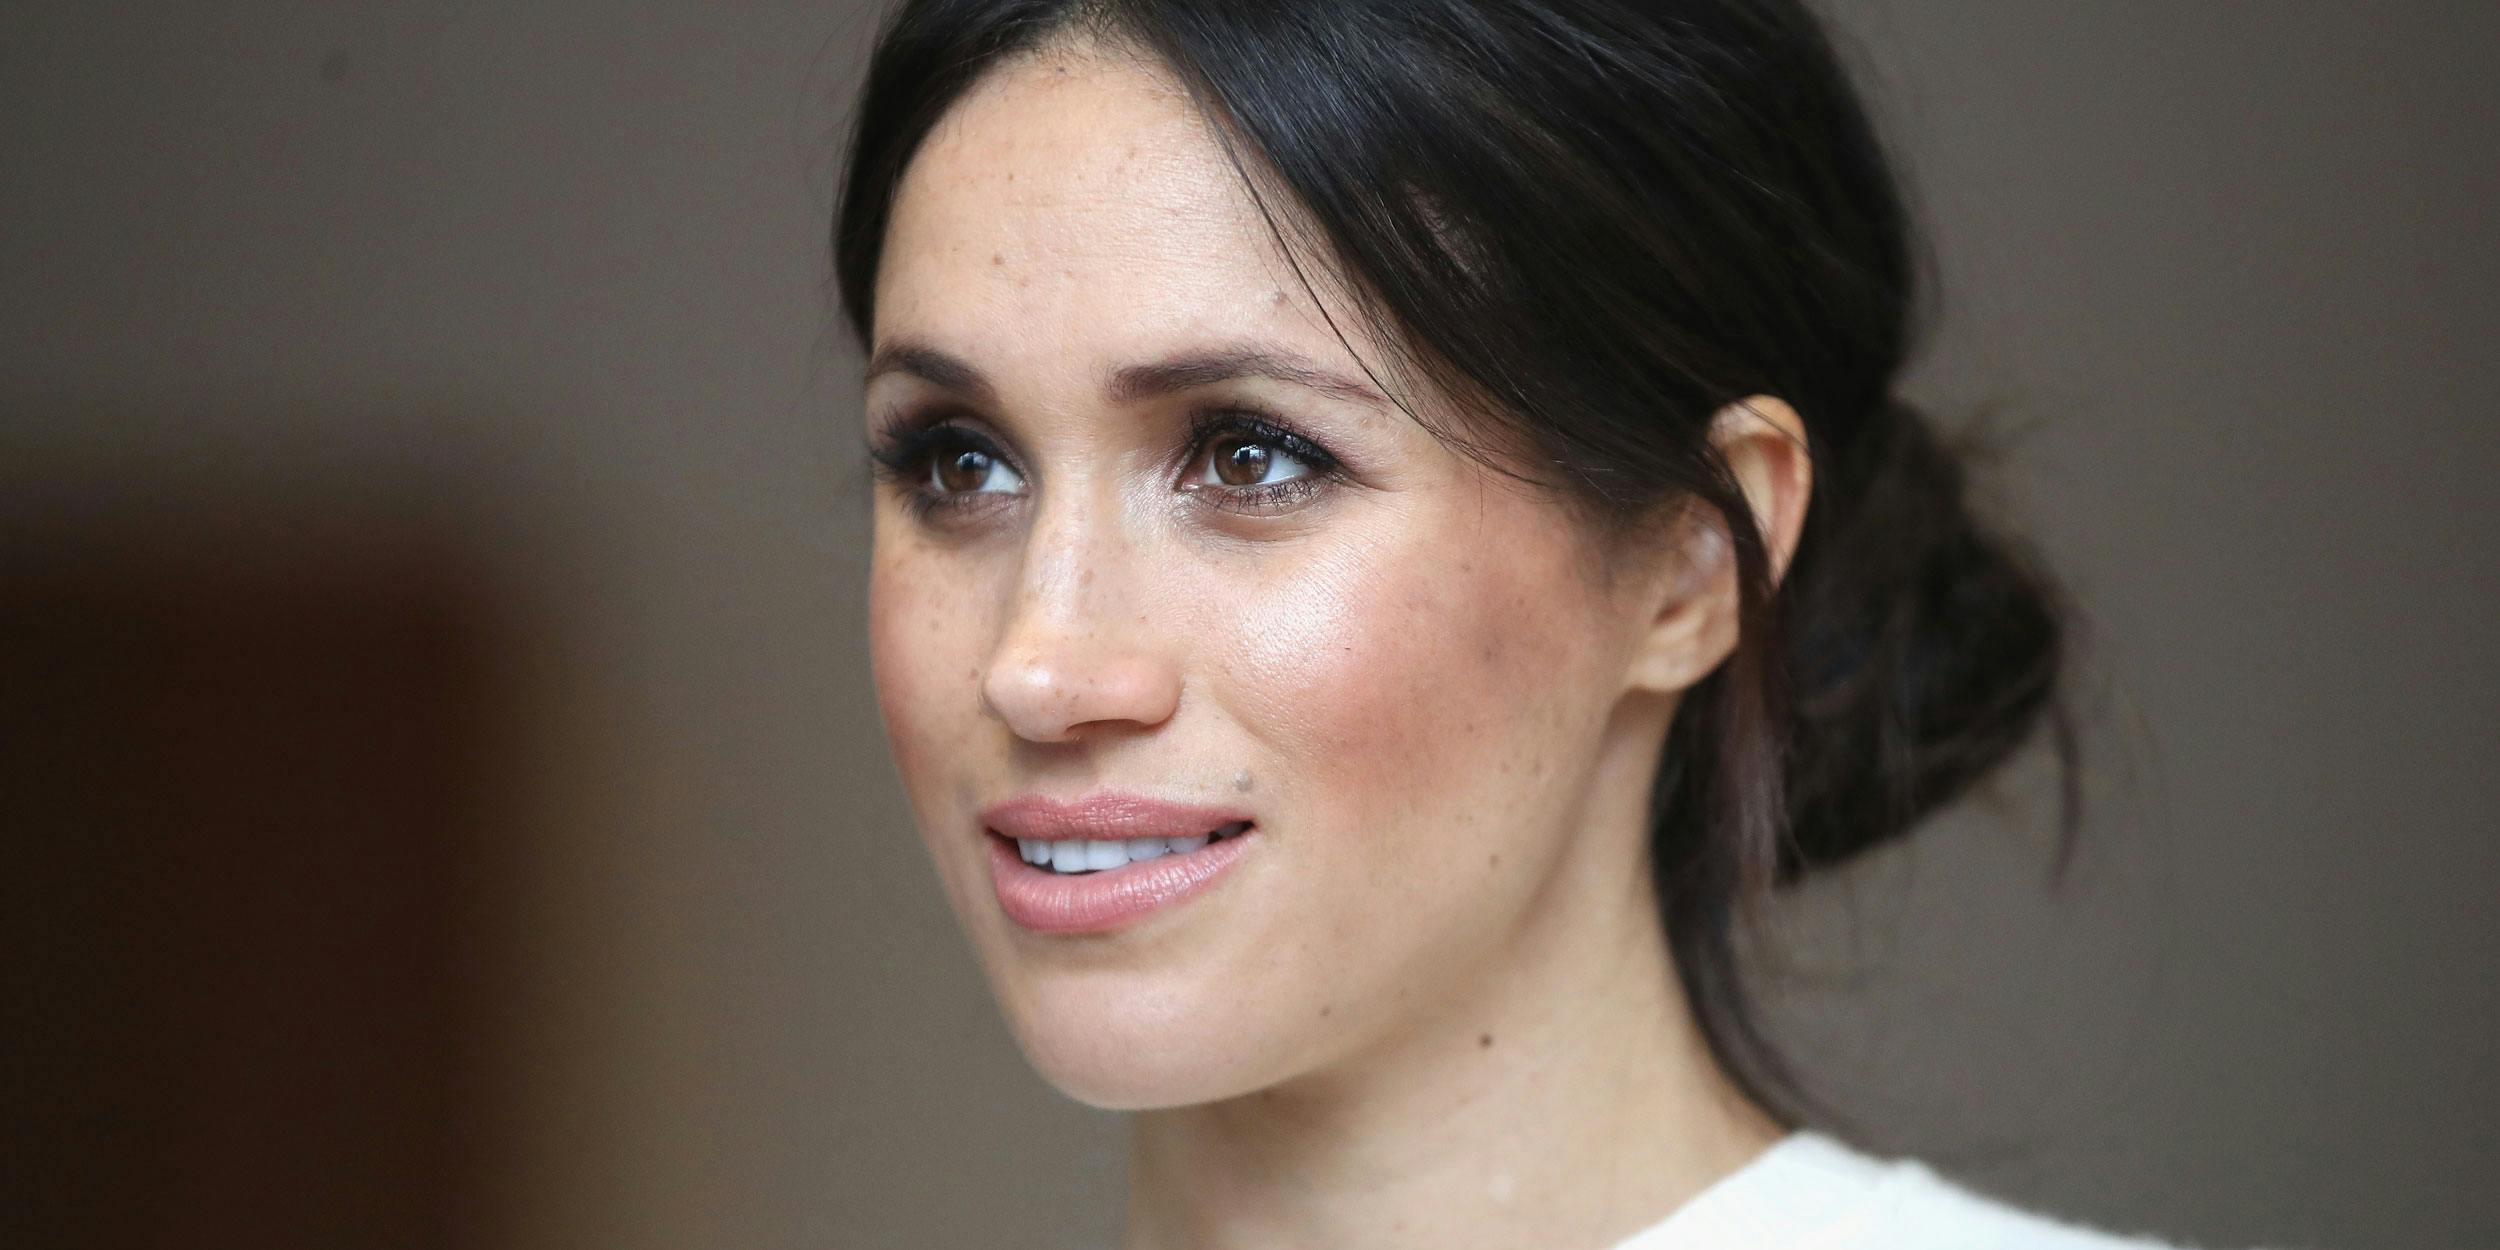 Meghan Markle visits Catalyst Inc, Northern Ireland, a next generation science park, to meet young entrepreneurs and innovators on March 23, 2018 in Belfast, Nothern Ireland. Markle's nephew, a cannabis farmer in Oregon, recently signed on with MTV for a cannabis show. The two don't have much of a relationship. (Photo by Pool/Samir Hussein/WireImage)